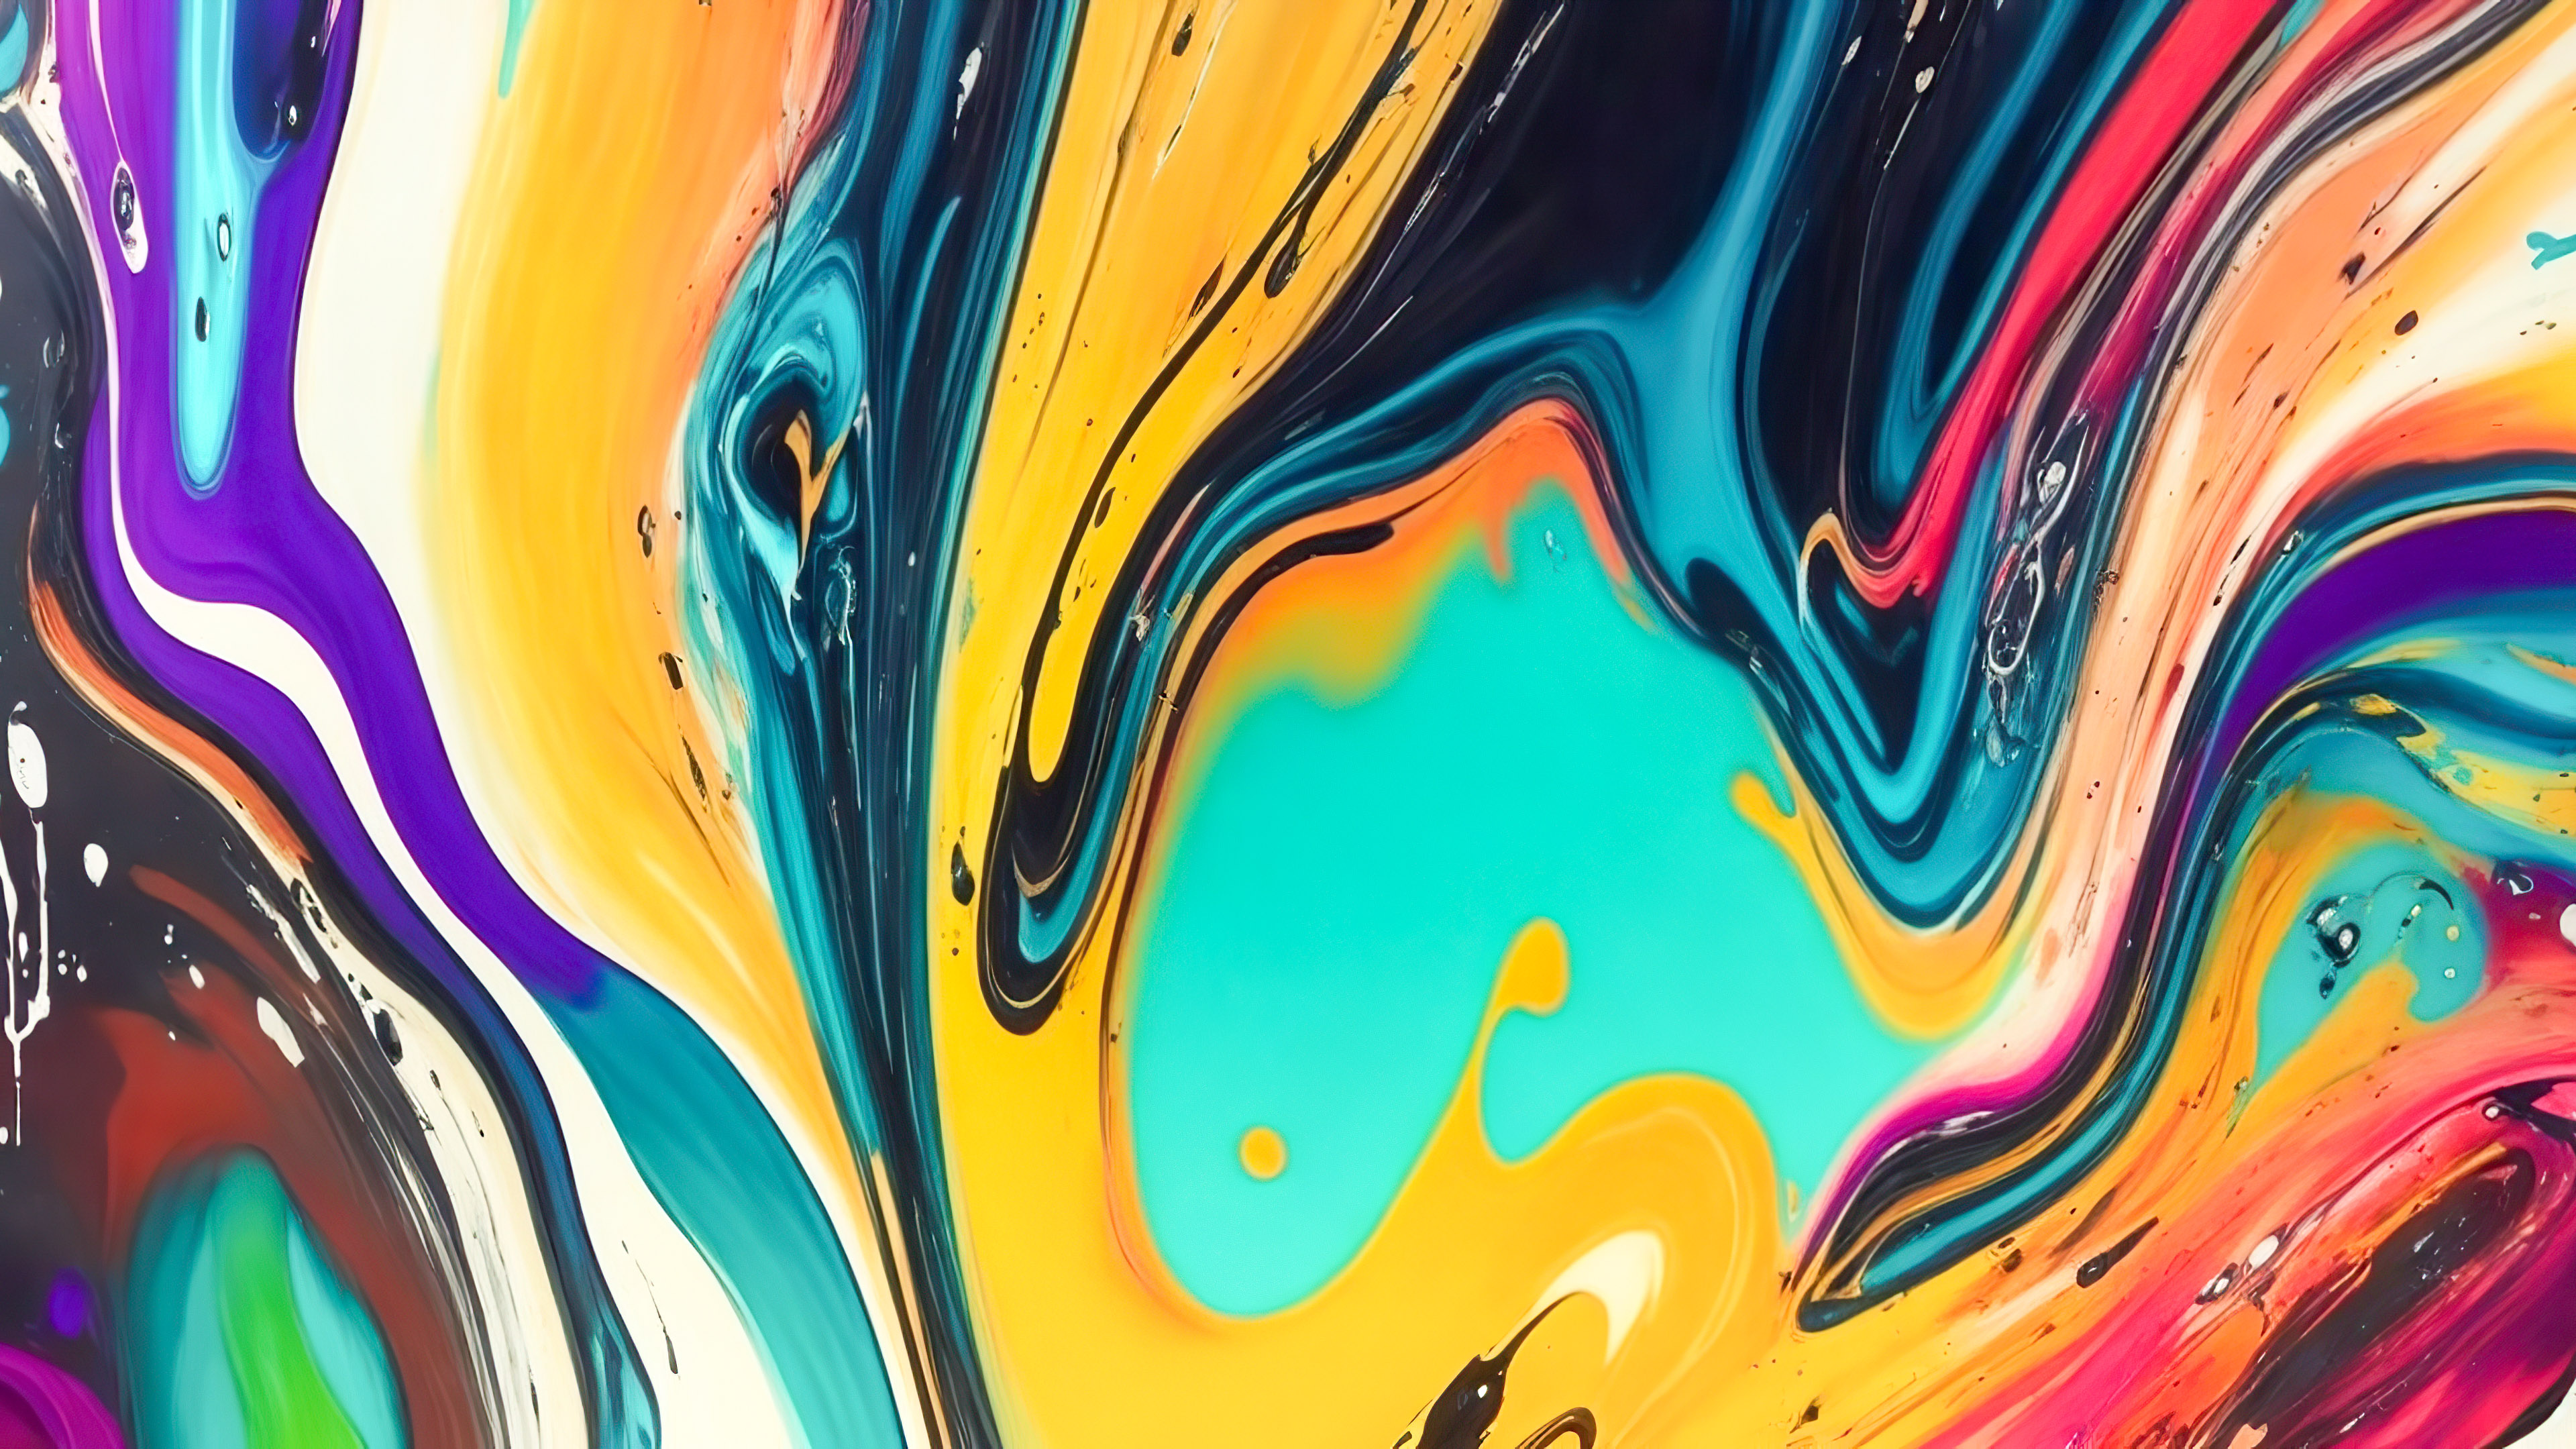 Dive into the world of abstract color wallpaper for desktop in 4K, capturing rhythmic and chaotic drips of paint for an artistic allure.